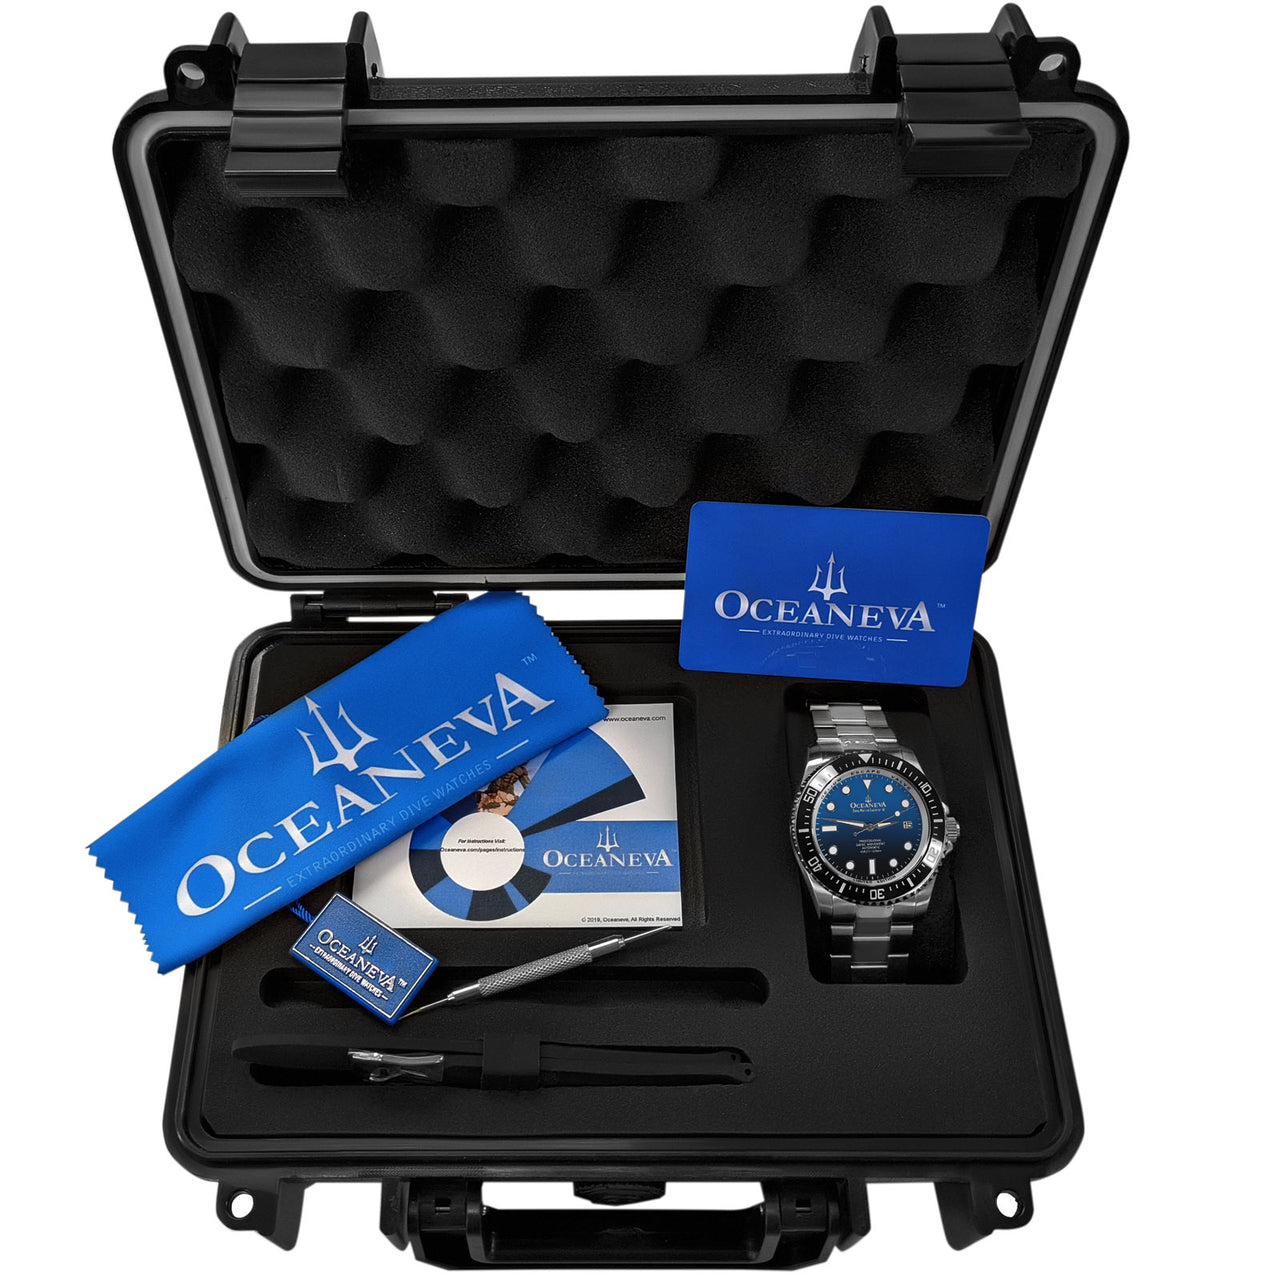 Oceaneva 1250M Dive Watch Blue Black With Packaging